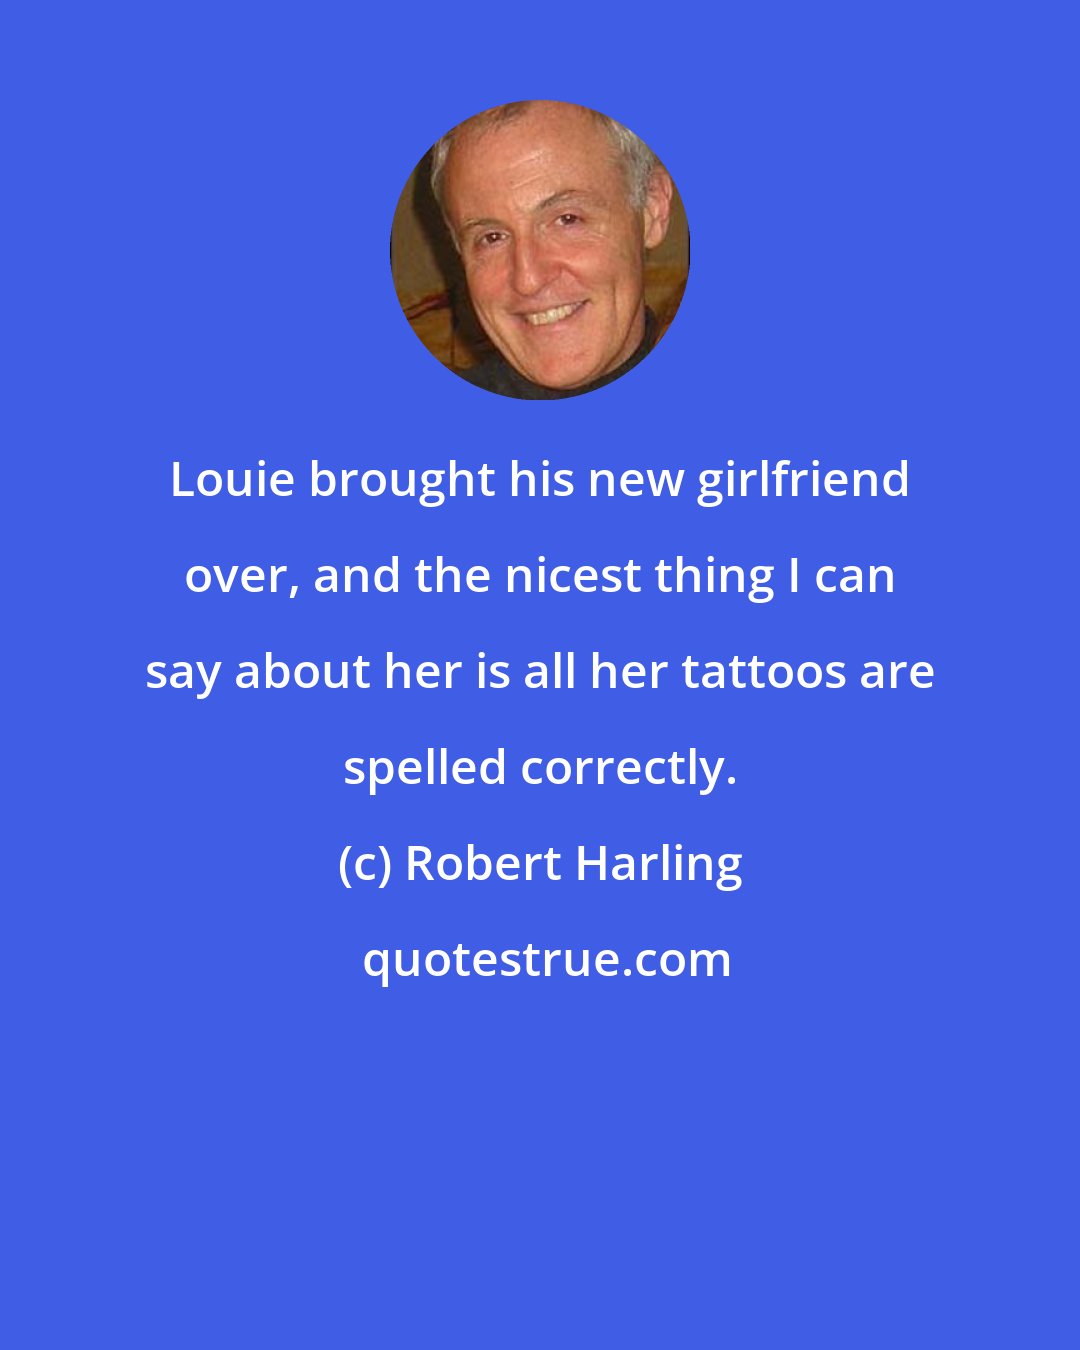 Robert Harling: Louie brought his new girlfriend over, and the nicest thing I can say about her is all her tattoos are spelled correctly.